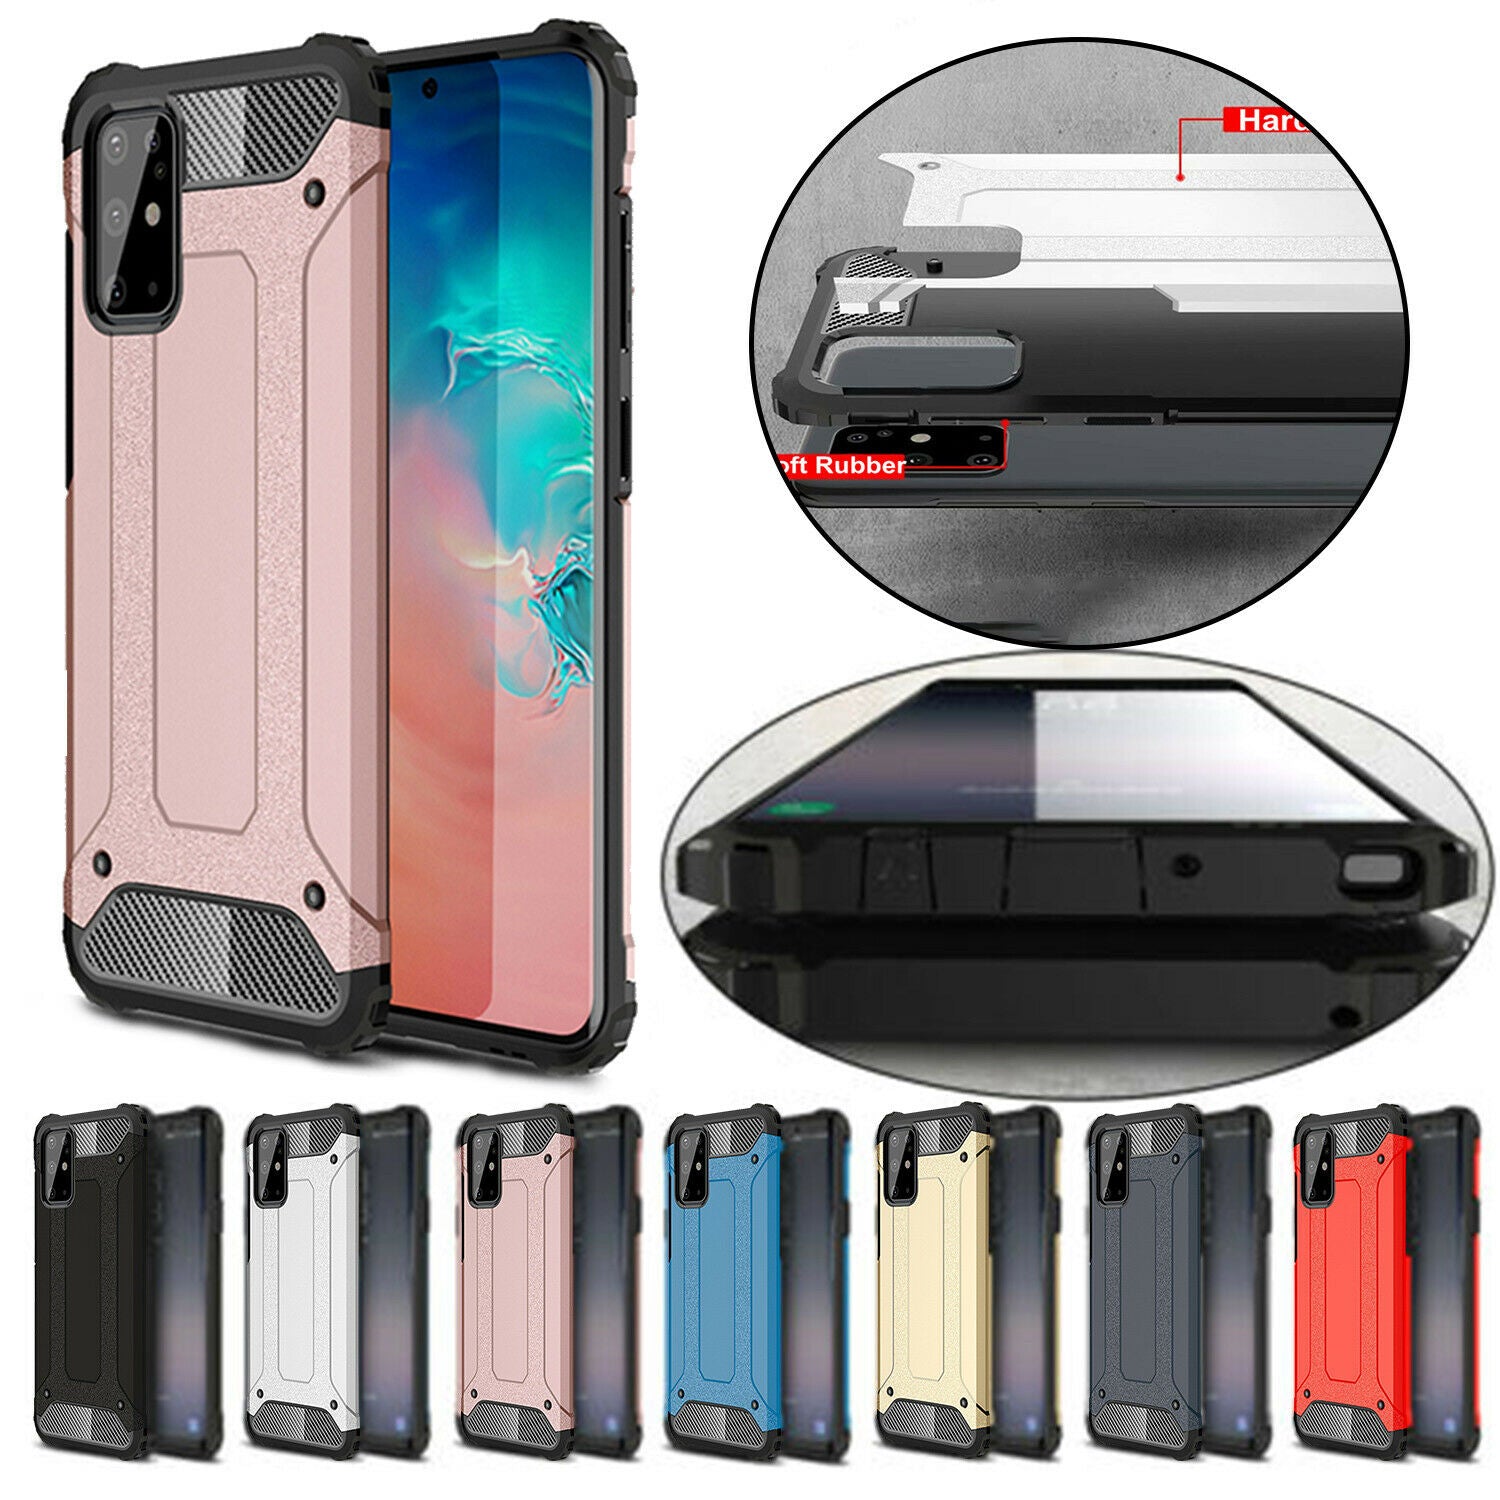 Protective Hybrid Armor Hard Case for Samsung Galaxy S21 Ultra Plus